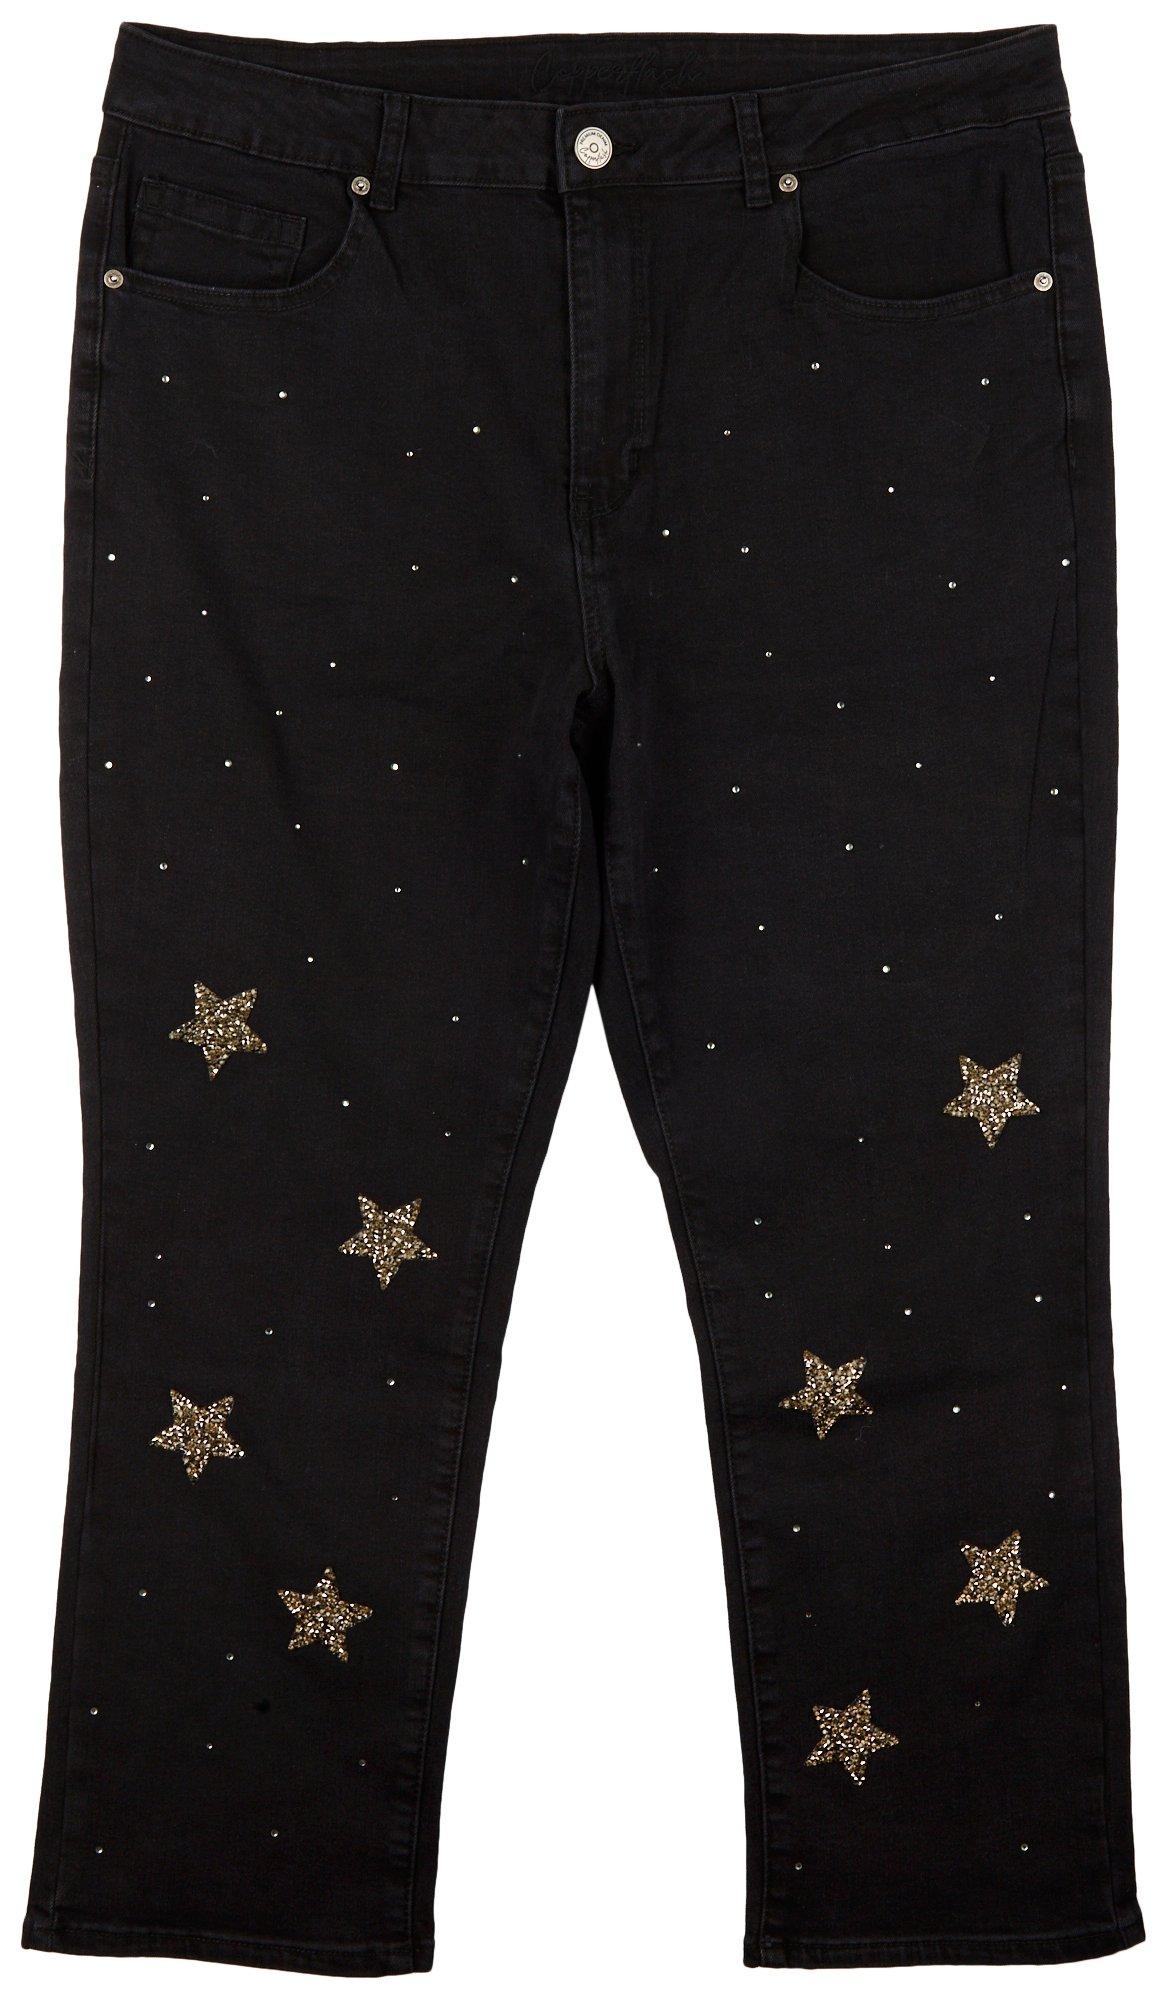 COPPERFLASH Womens Embellished Star Jeans